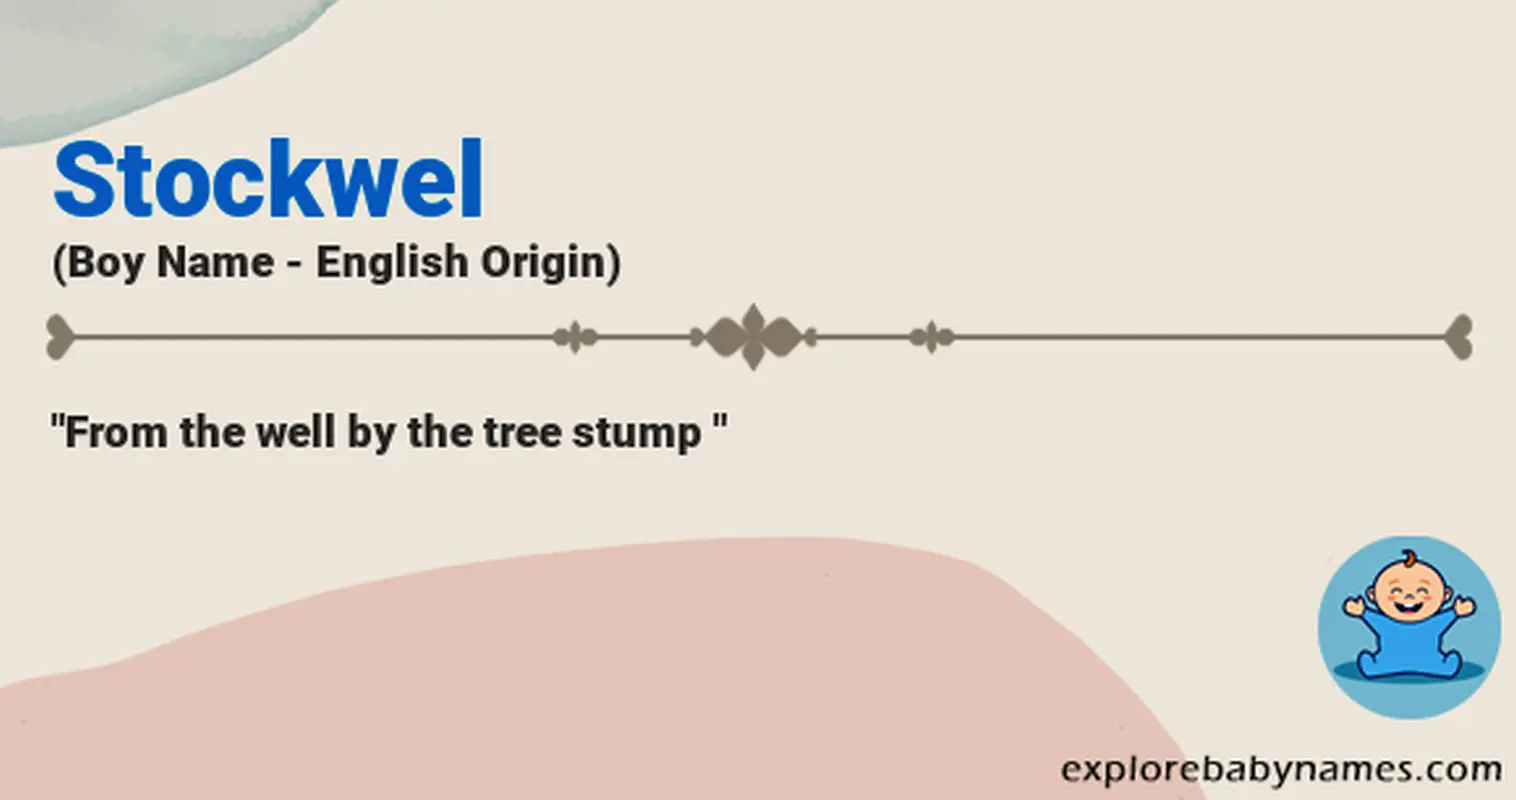 Meaning of Stockwel